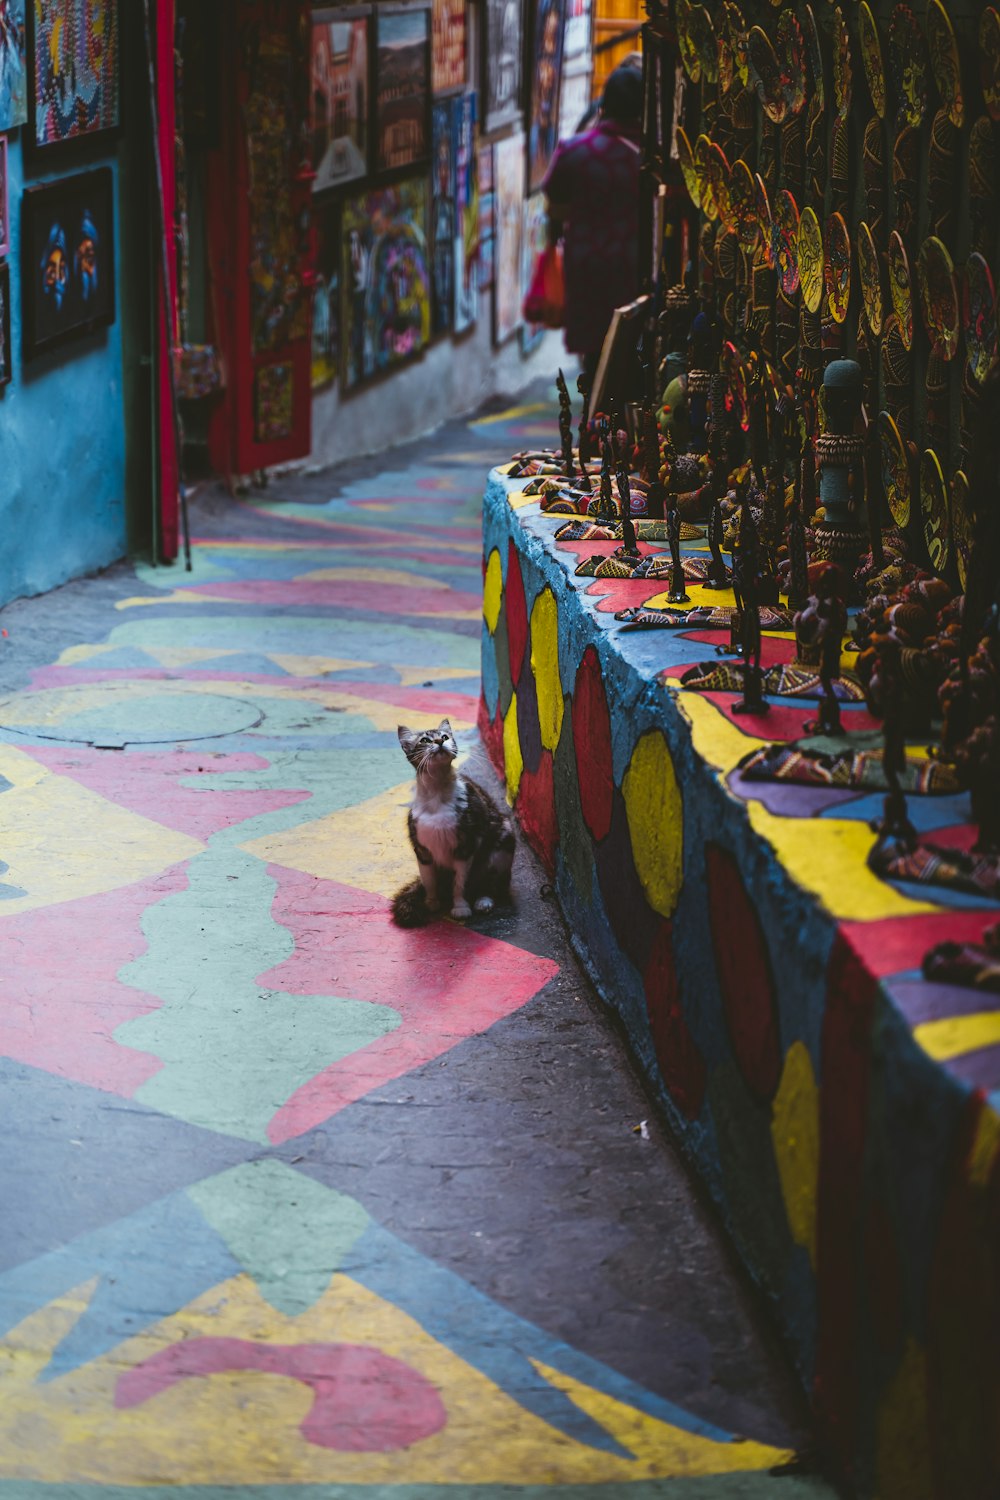 a cat sitting on the ground in front of a store